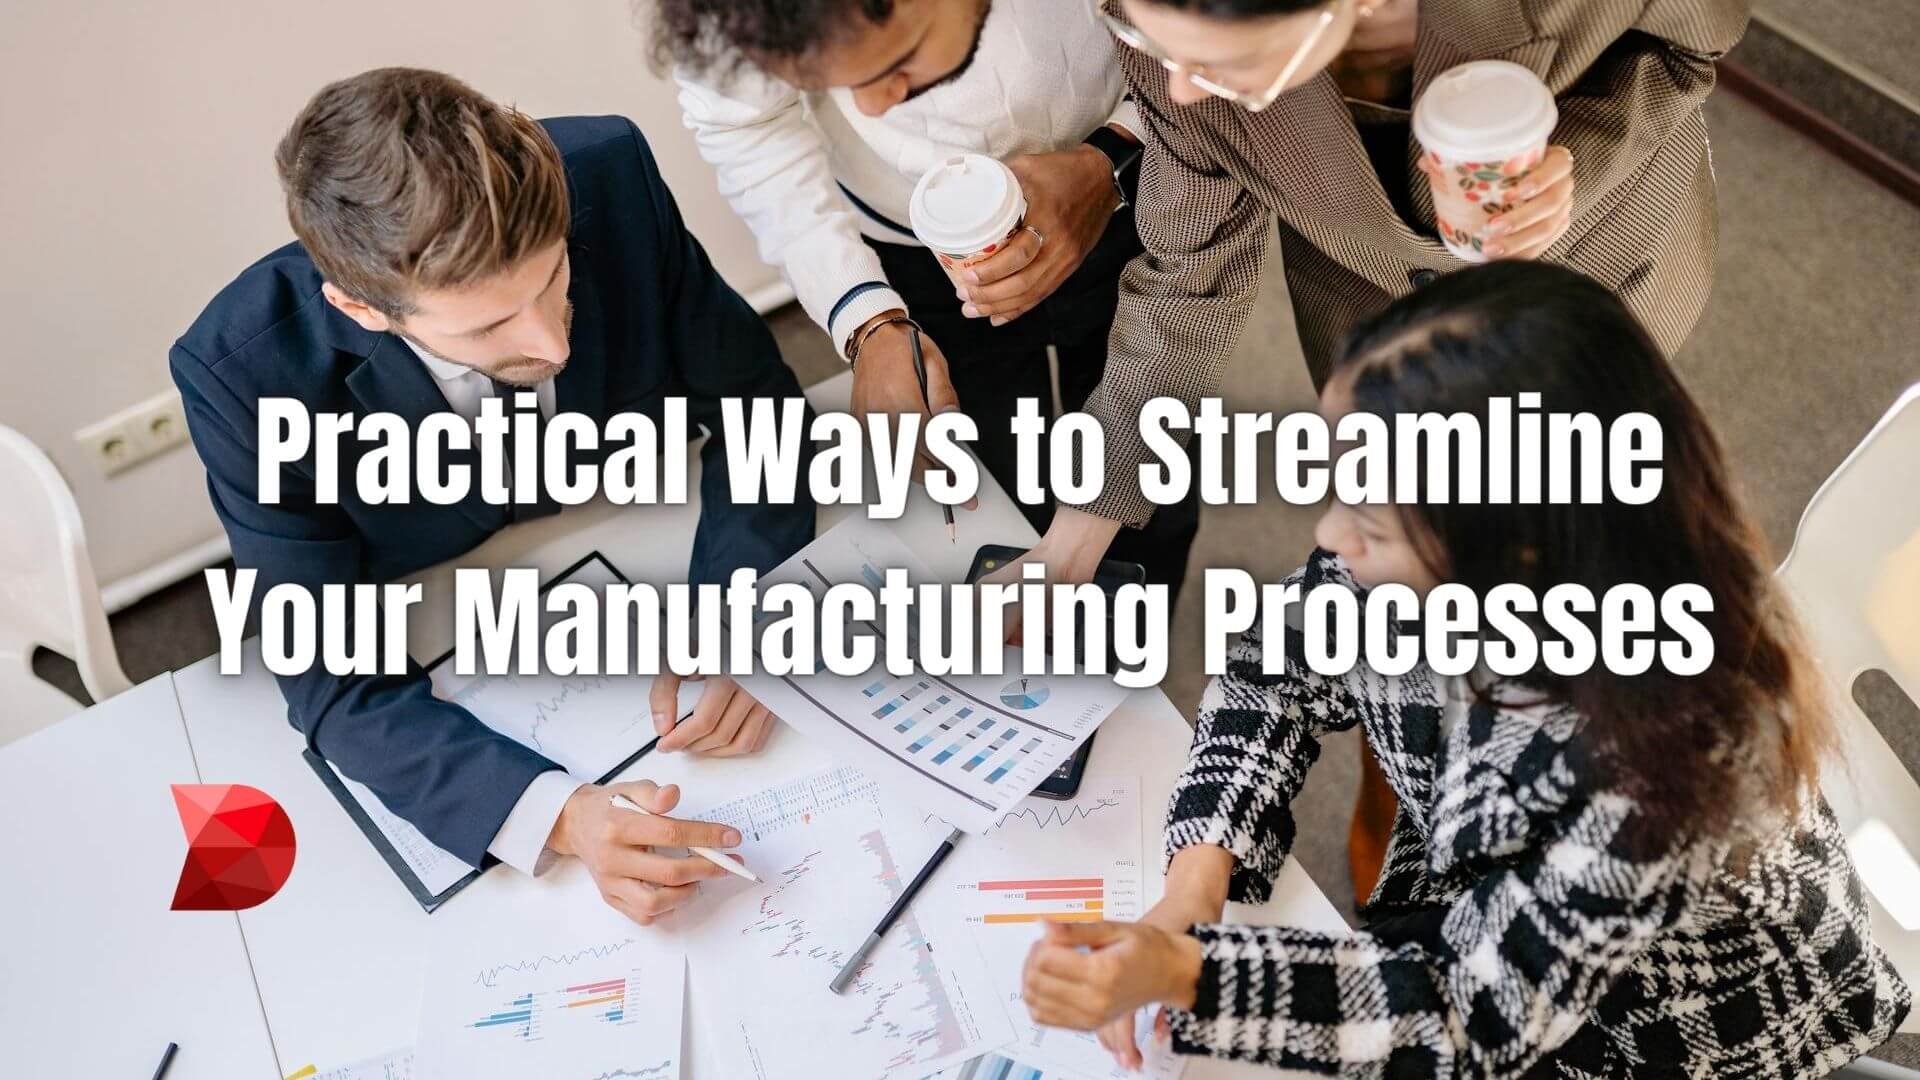 Maximize efficiency in manufacturing with our full guide. Learn practical strategies to streamline processes and optimize production.